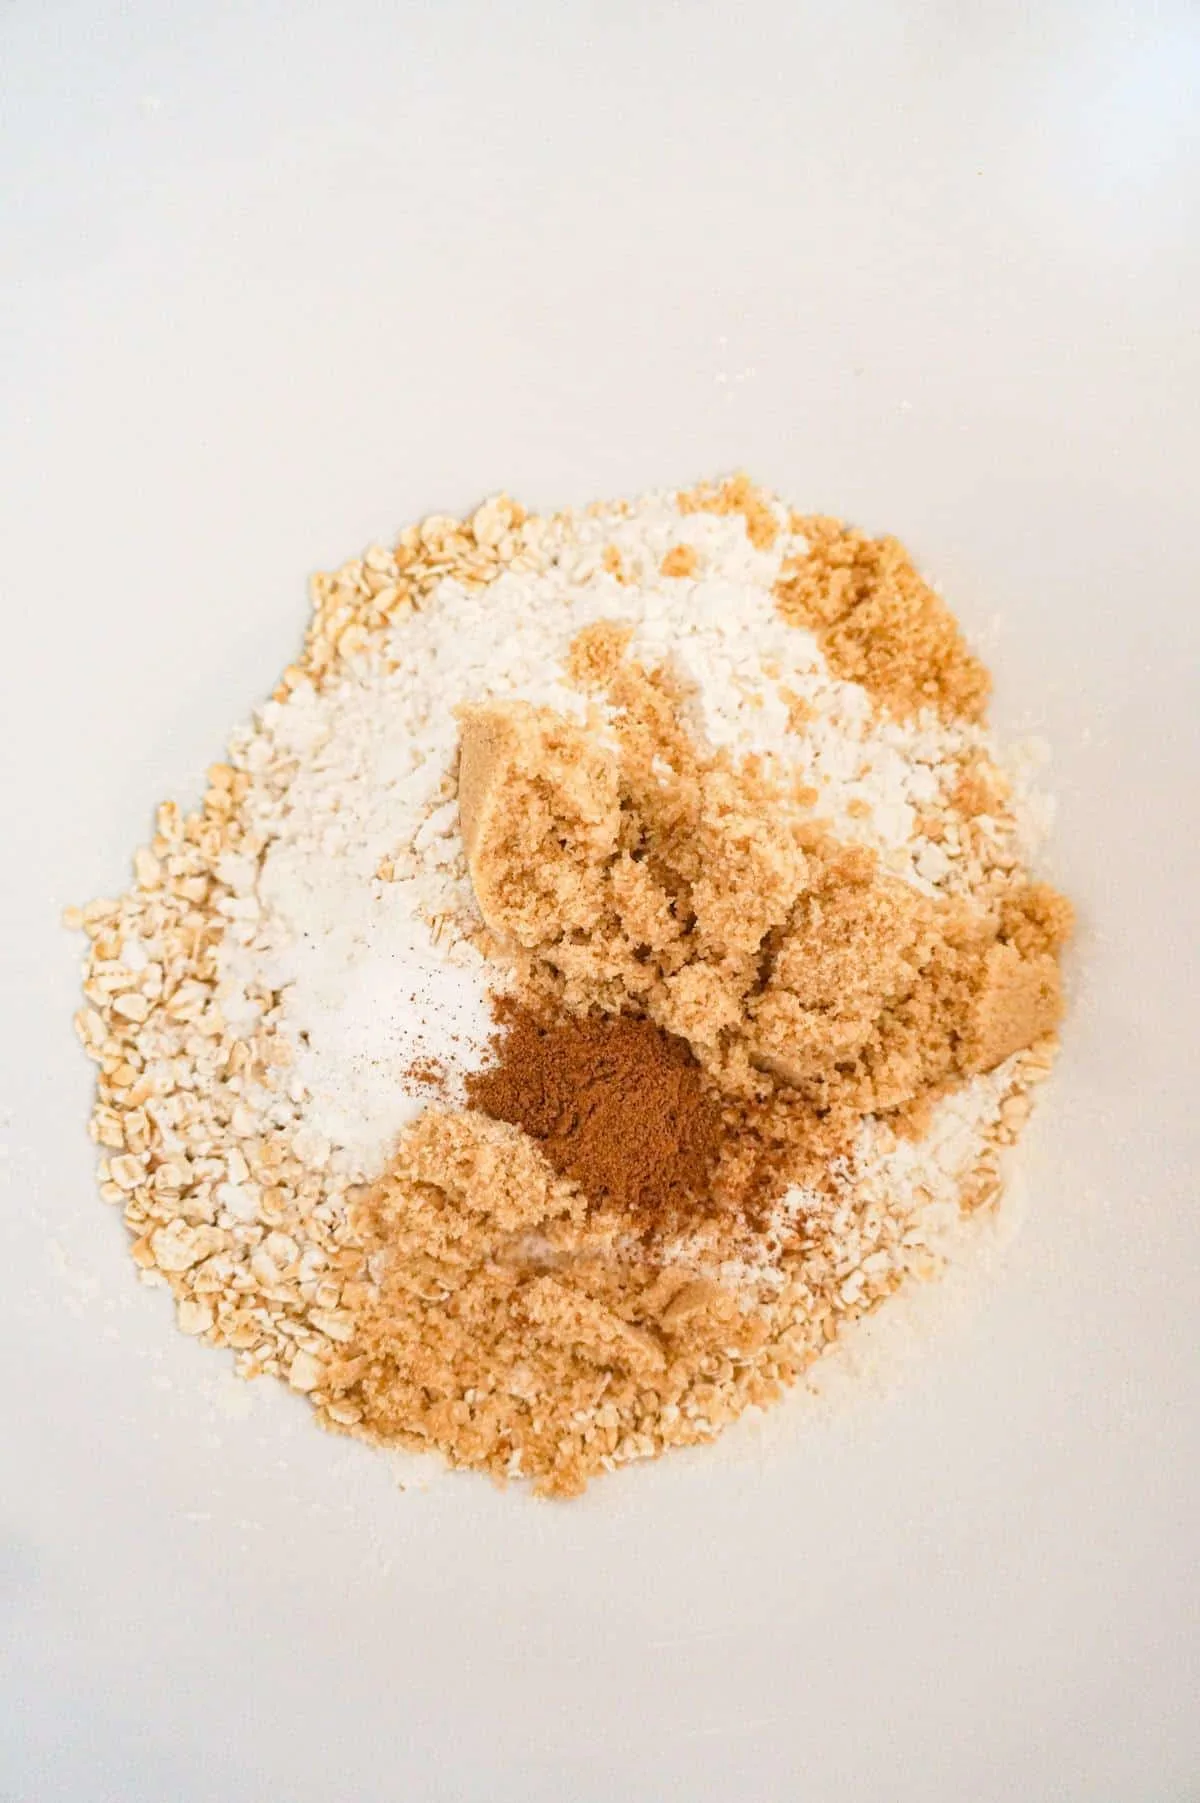 salt, cinnamon, flour, quick oats and brown sugar in a mixing bowl